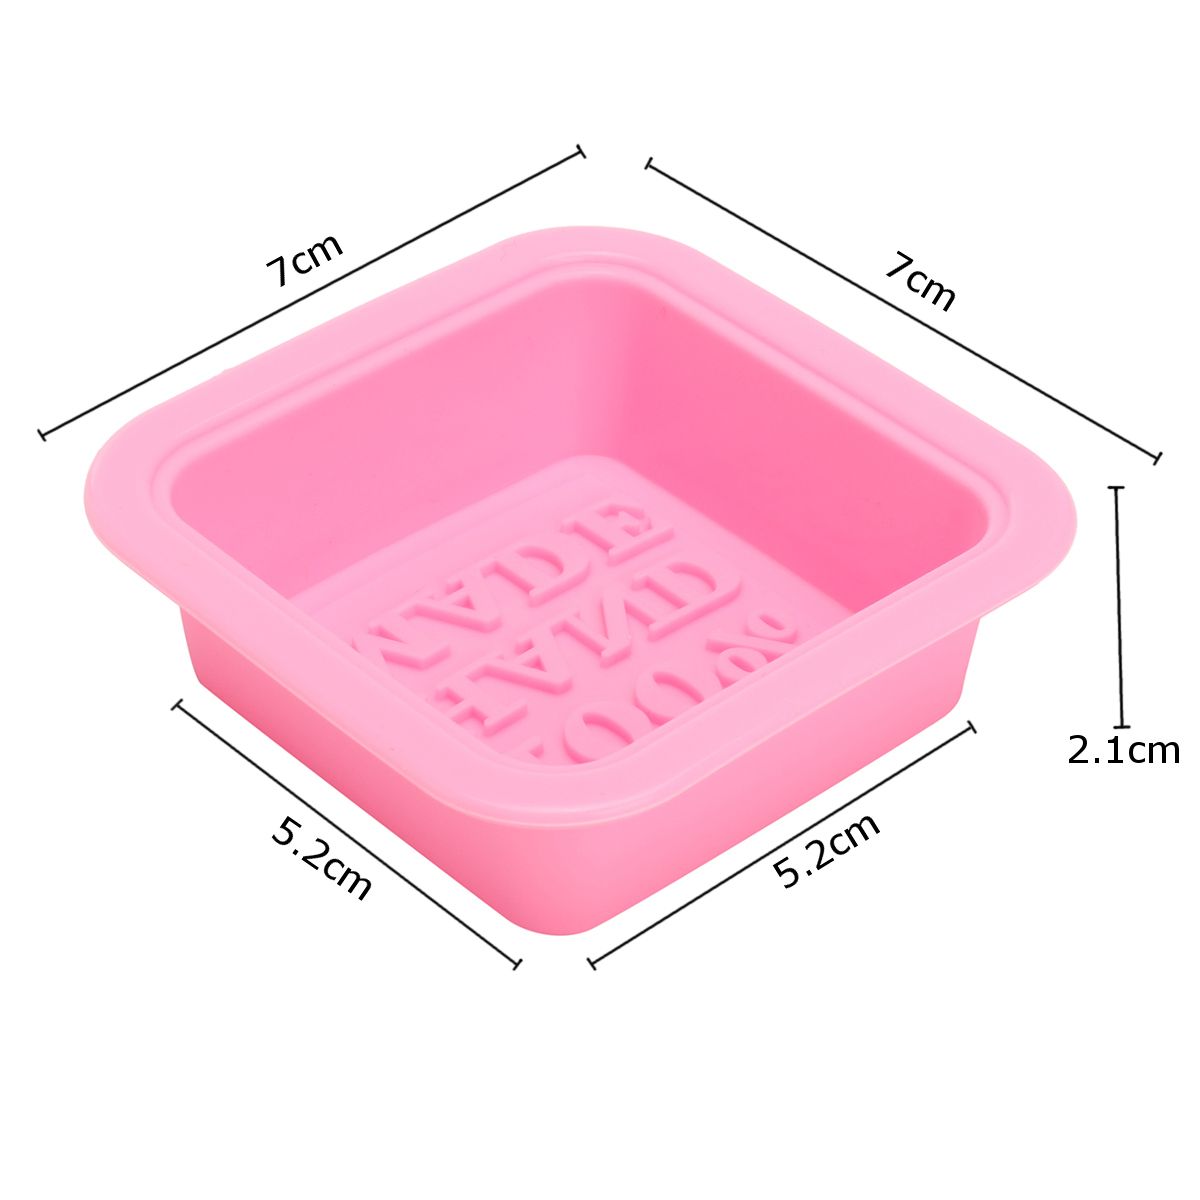 25PcsSet-Handmade-Silicone-Soap-Mold-Square-Flexible-Baking-Mold-for-Soap-Making-Cupcake-DIY-Homemad-1439426